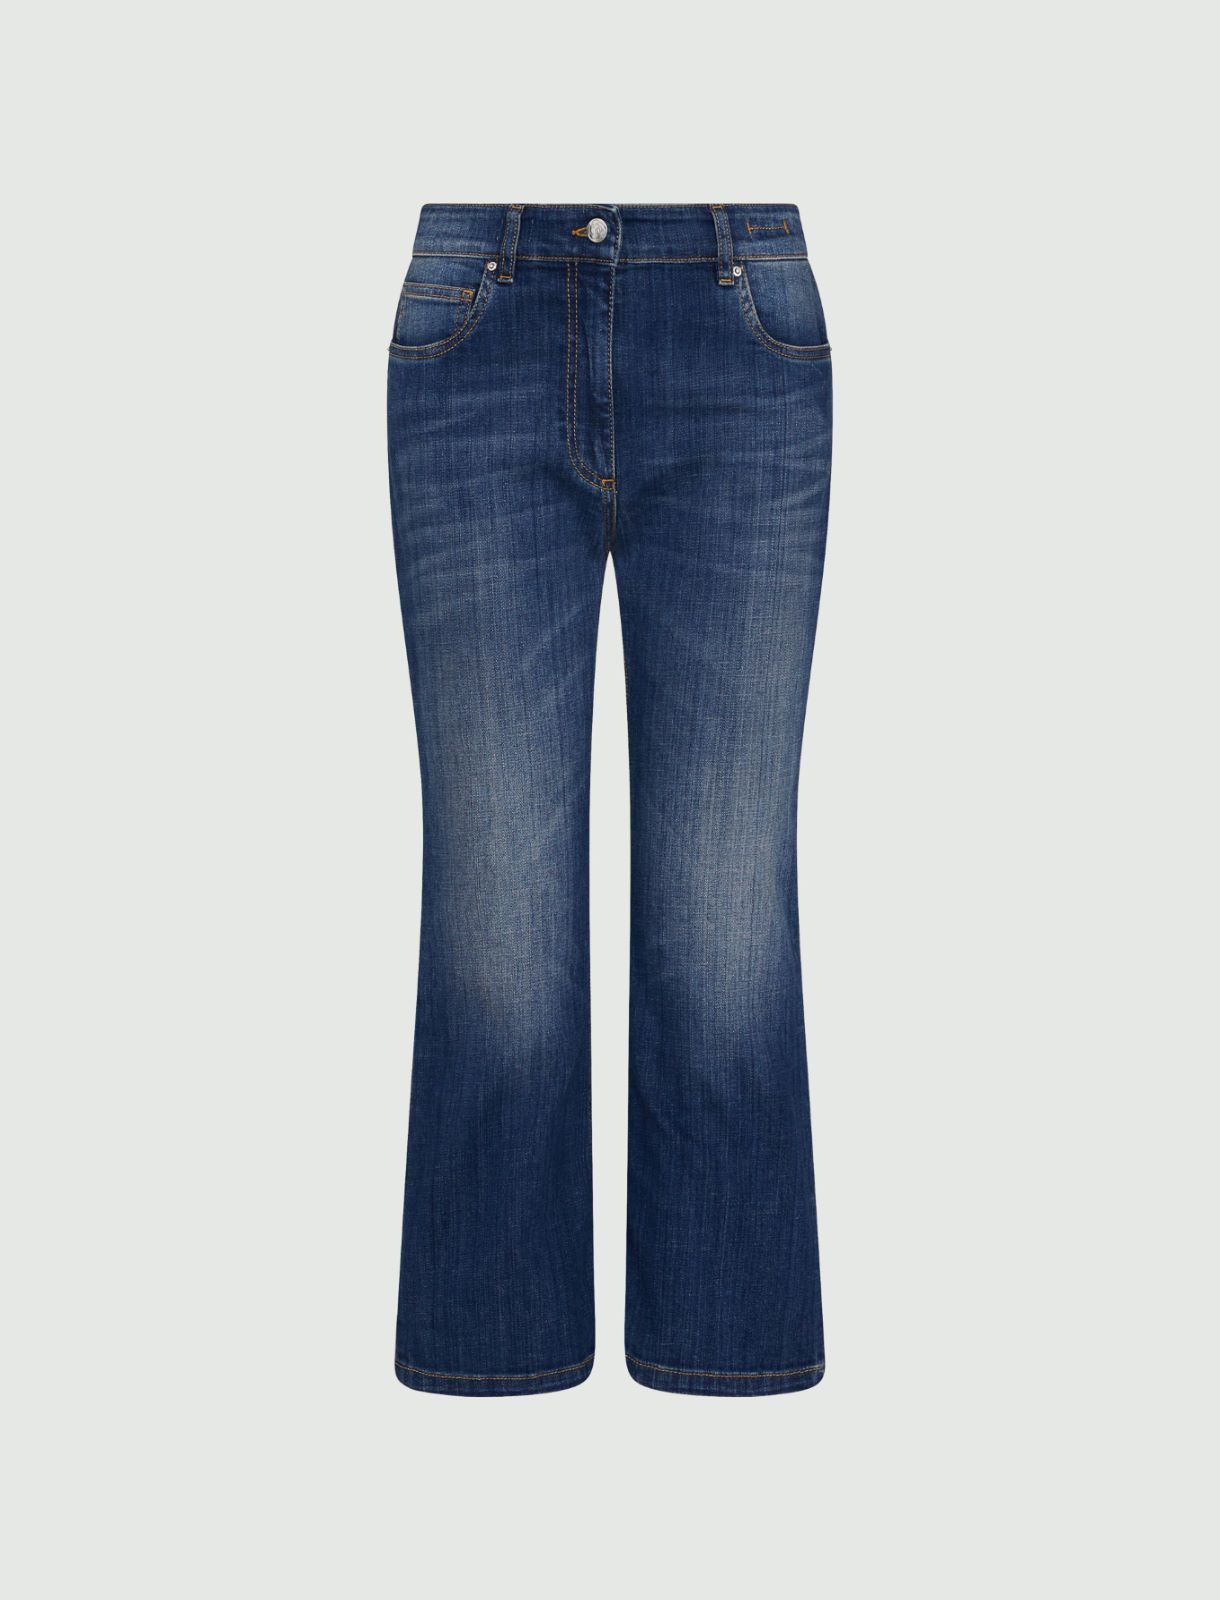 Flared jeans - Blue jeans - Marella - 6